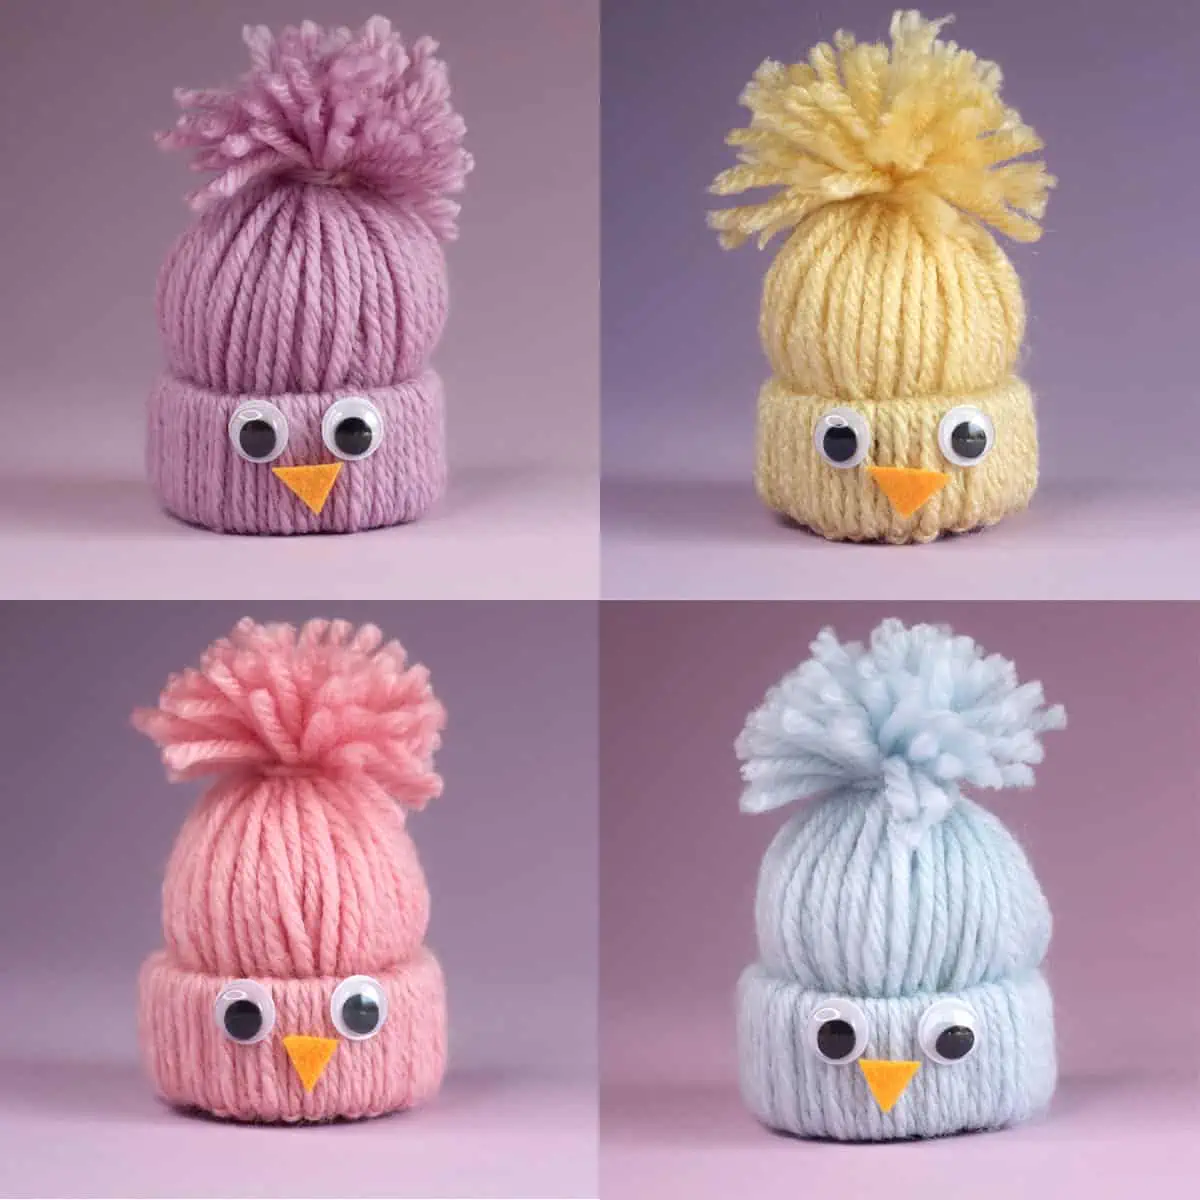 Four different yarn chick craft projects in colors pink, purple, yellow, and blue.